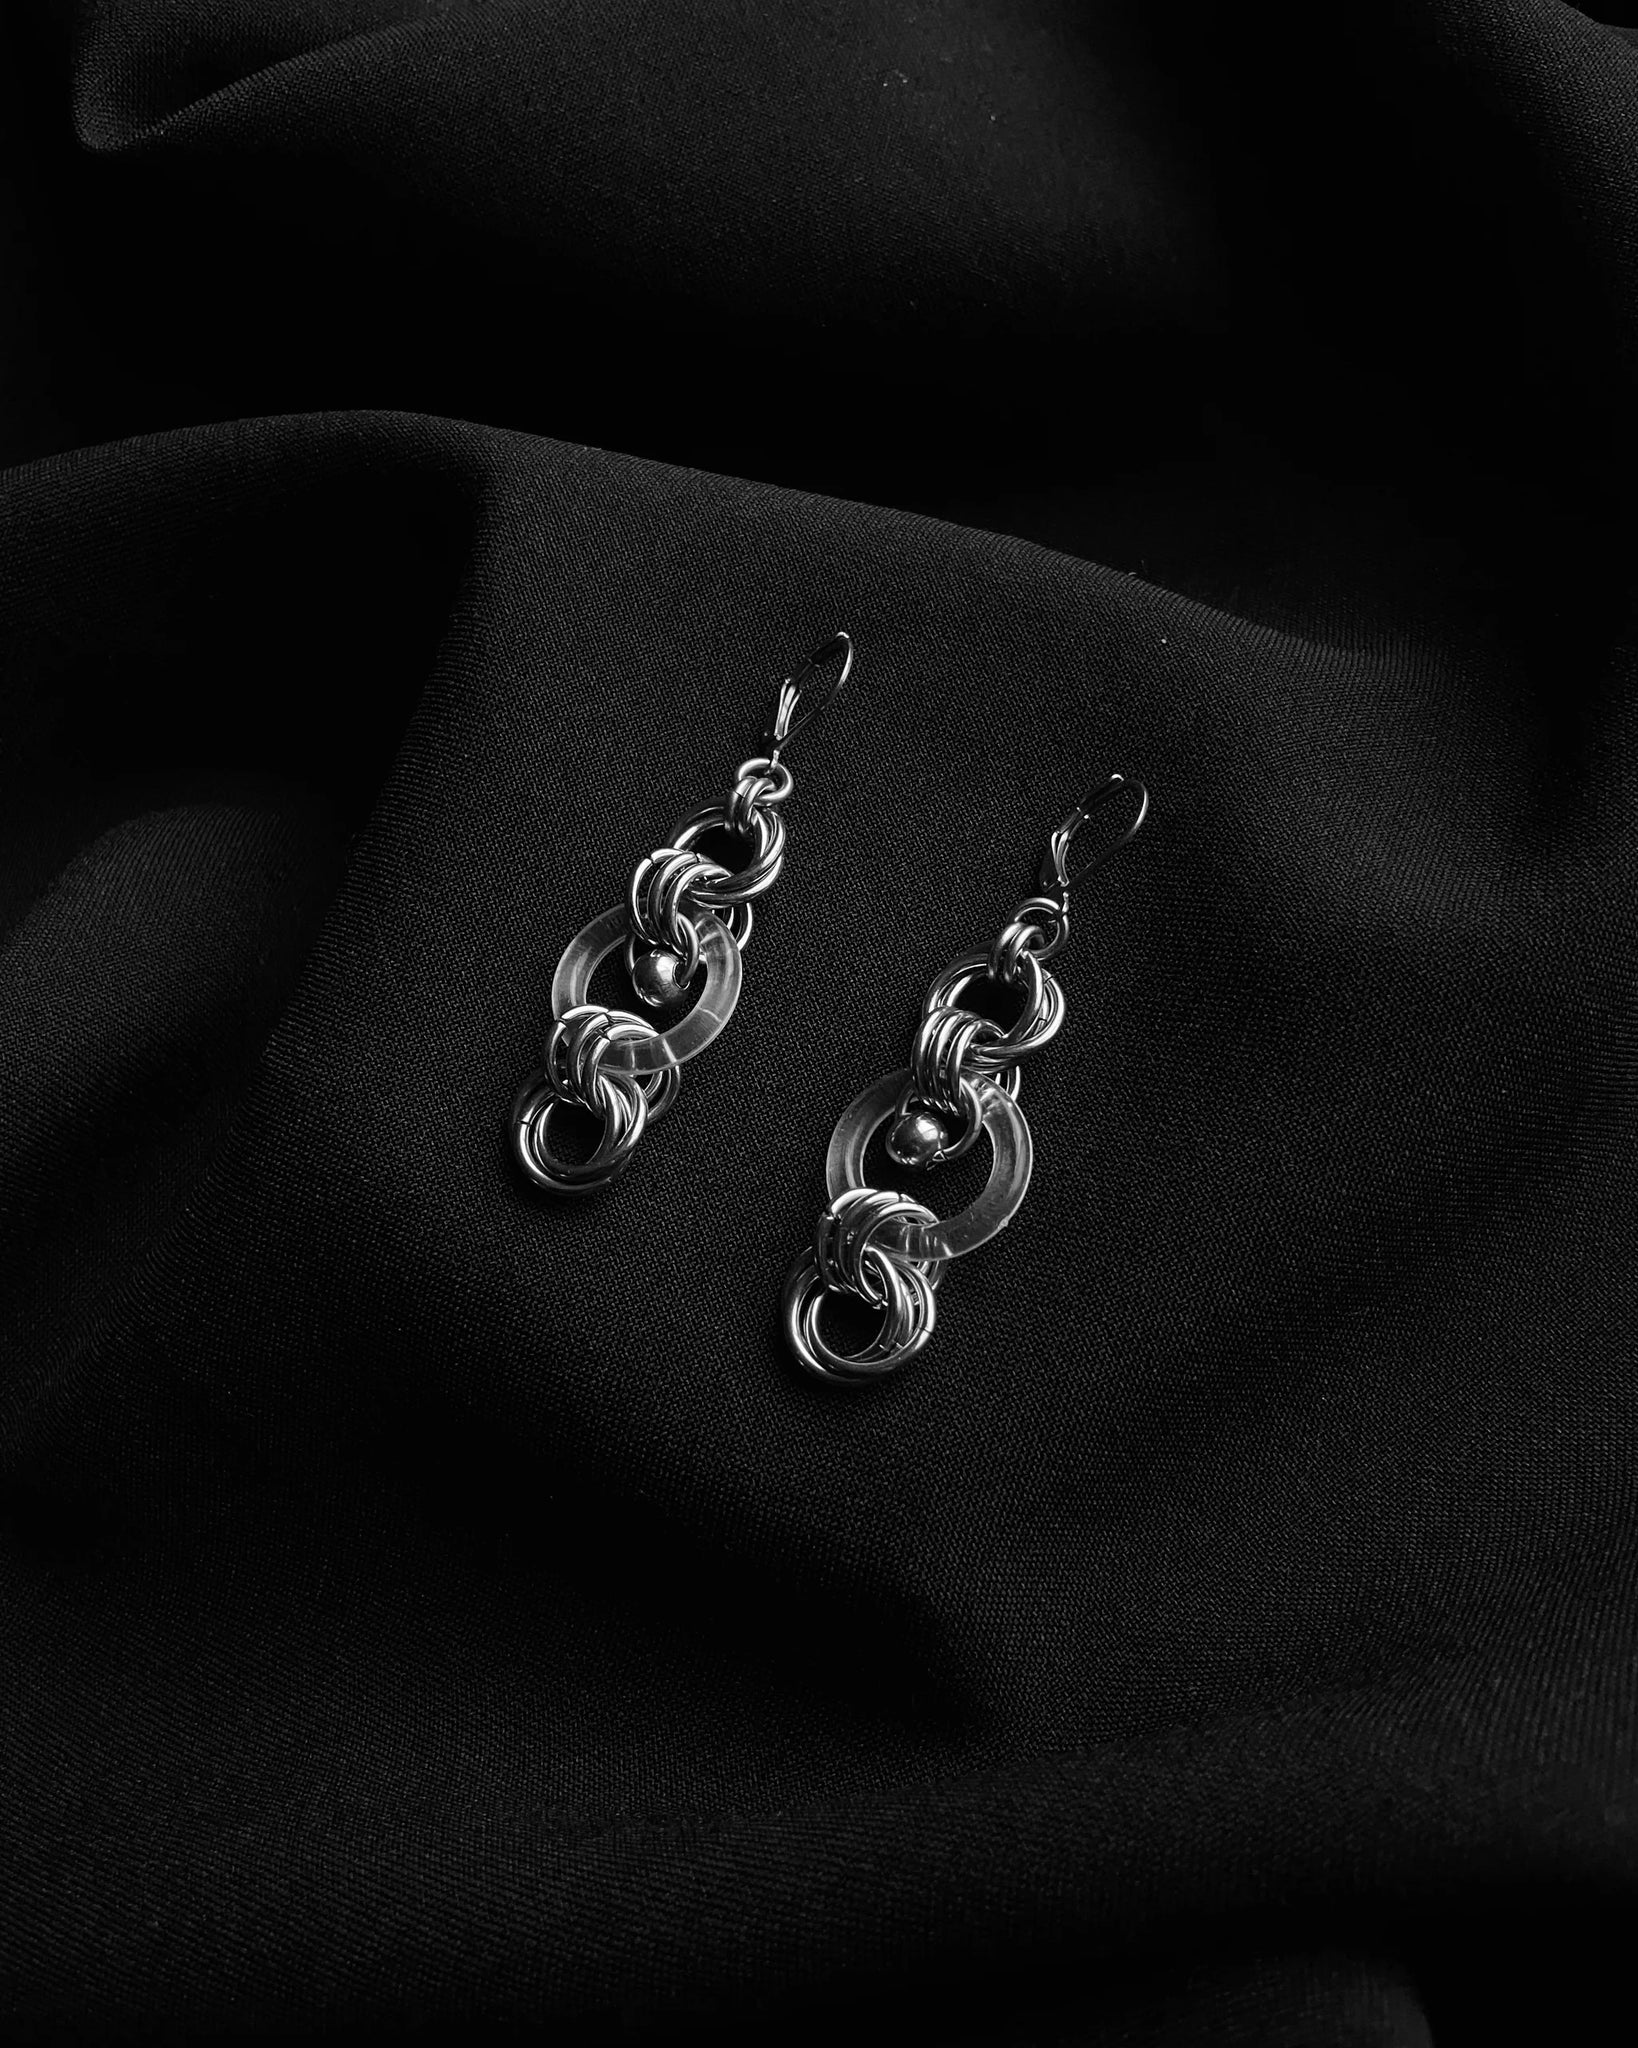 Inside Out Oracle Earrings (Stainless Steel)